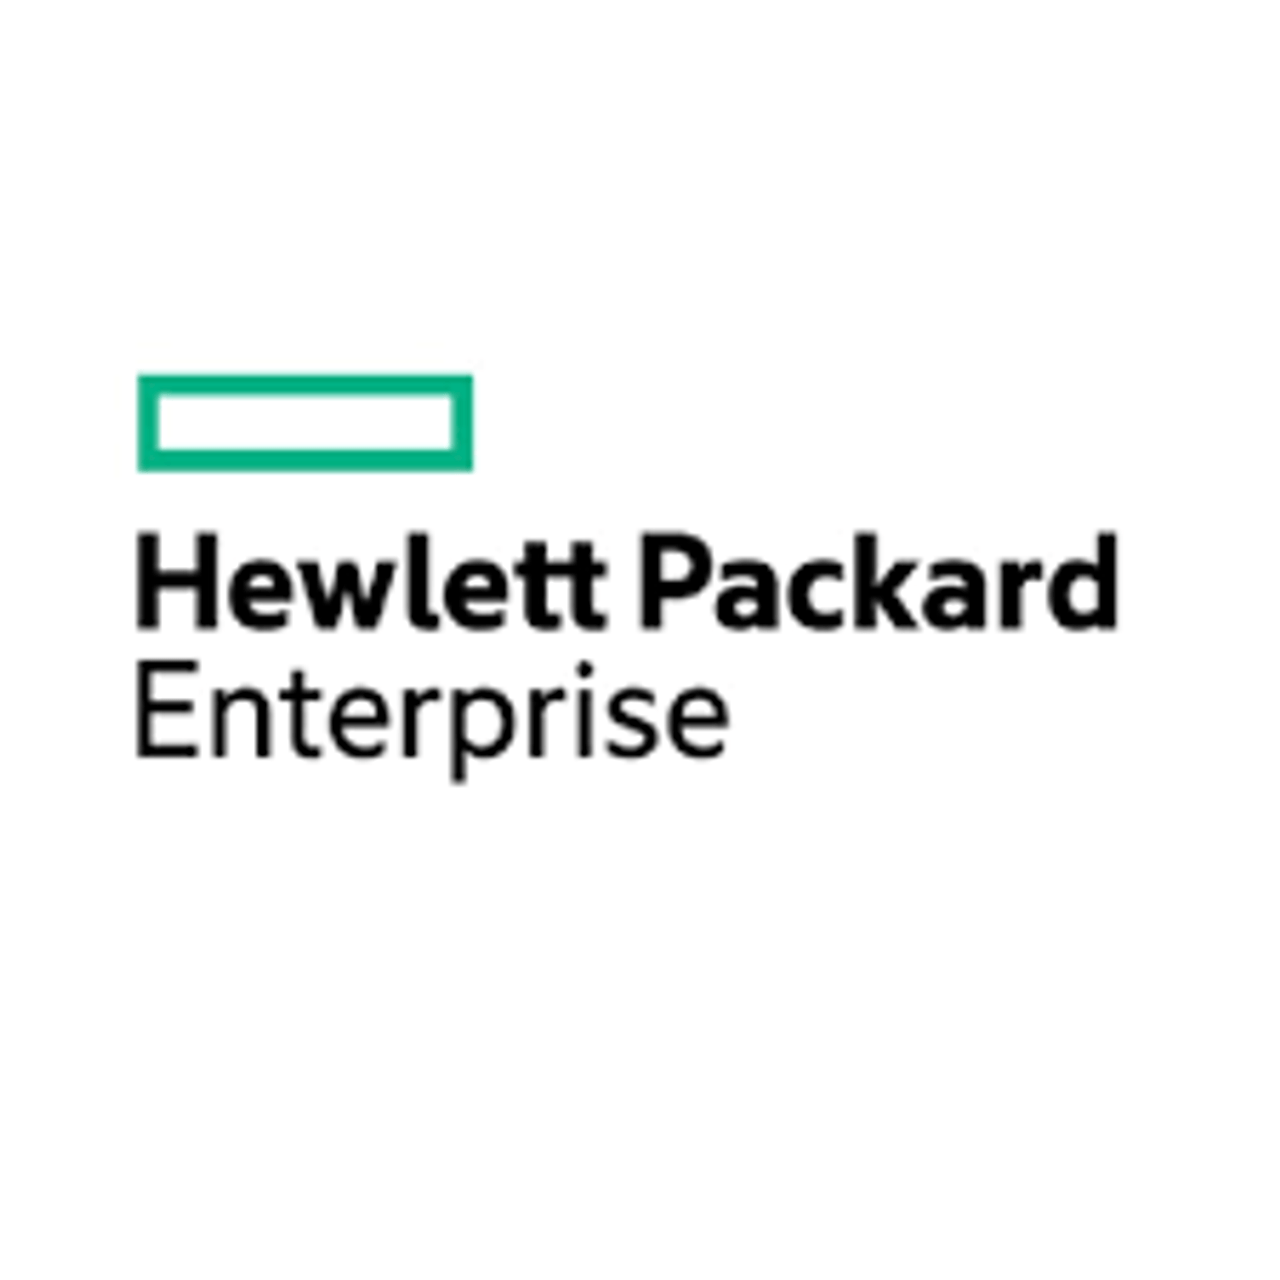 HPE 1Y PW FC 24x7 wCDMR 7506 Swt pdt SVC